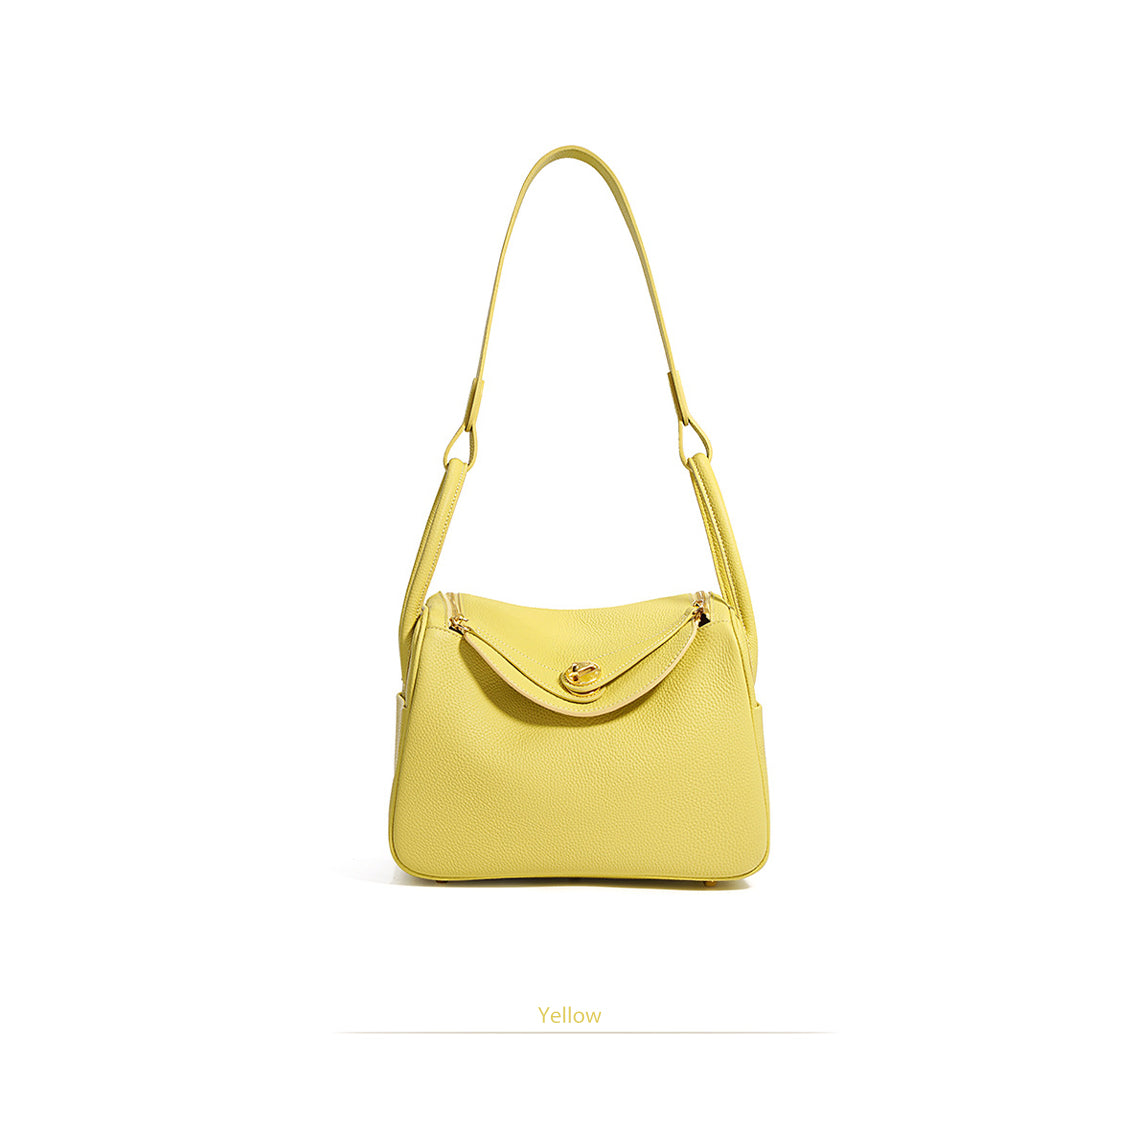 Leather Handbag | Inspired Leather Lindy Handbag in Yellow - POPSEWING™